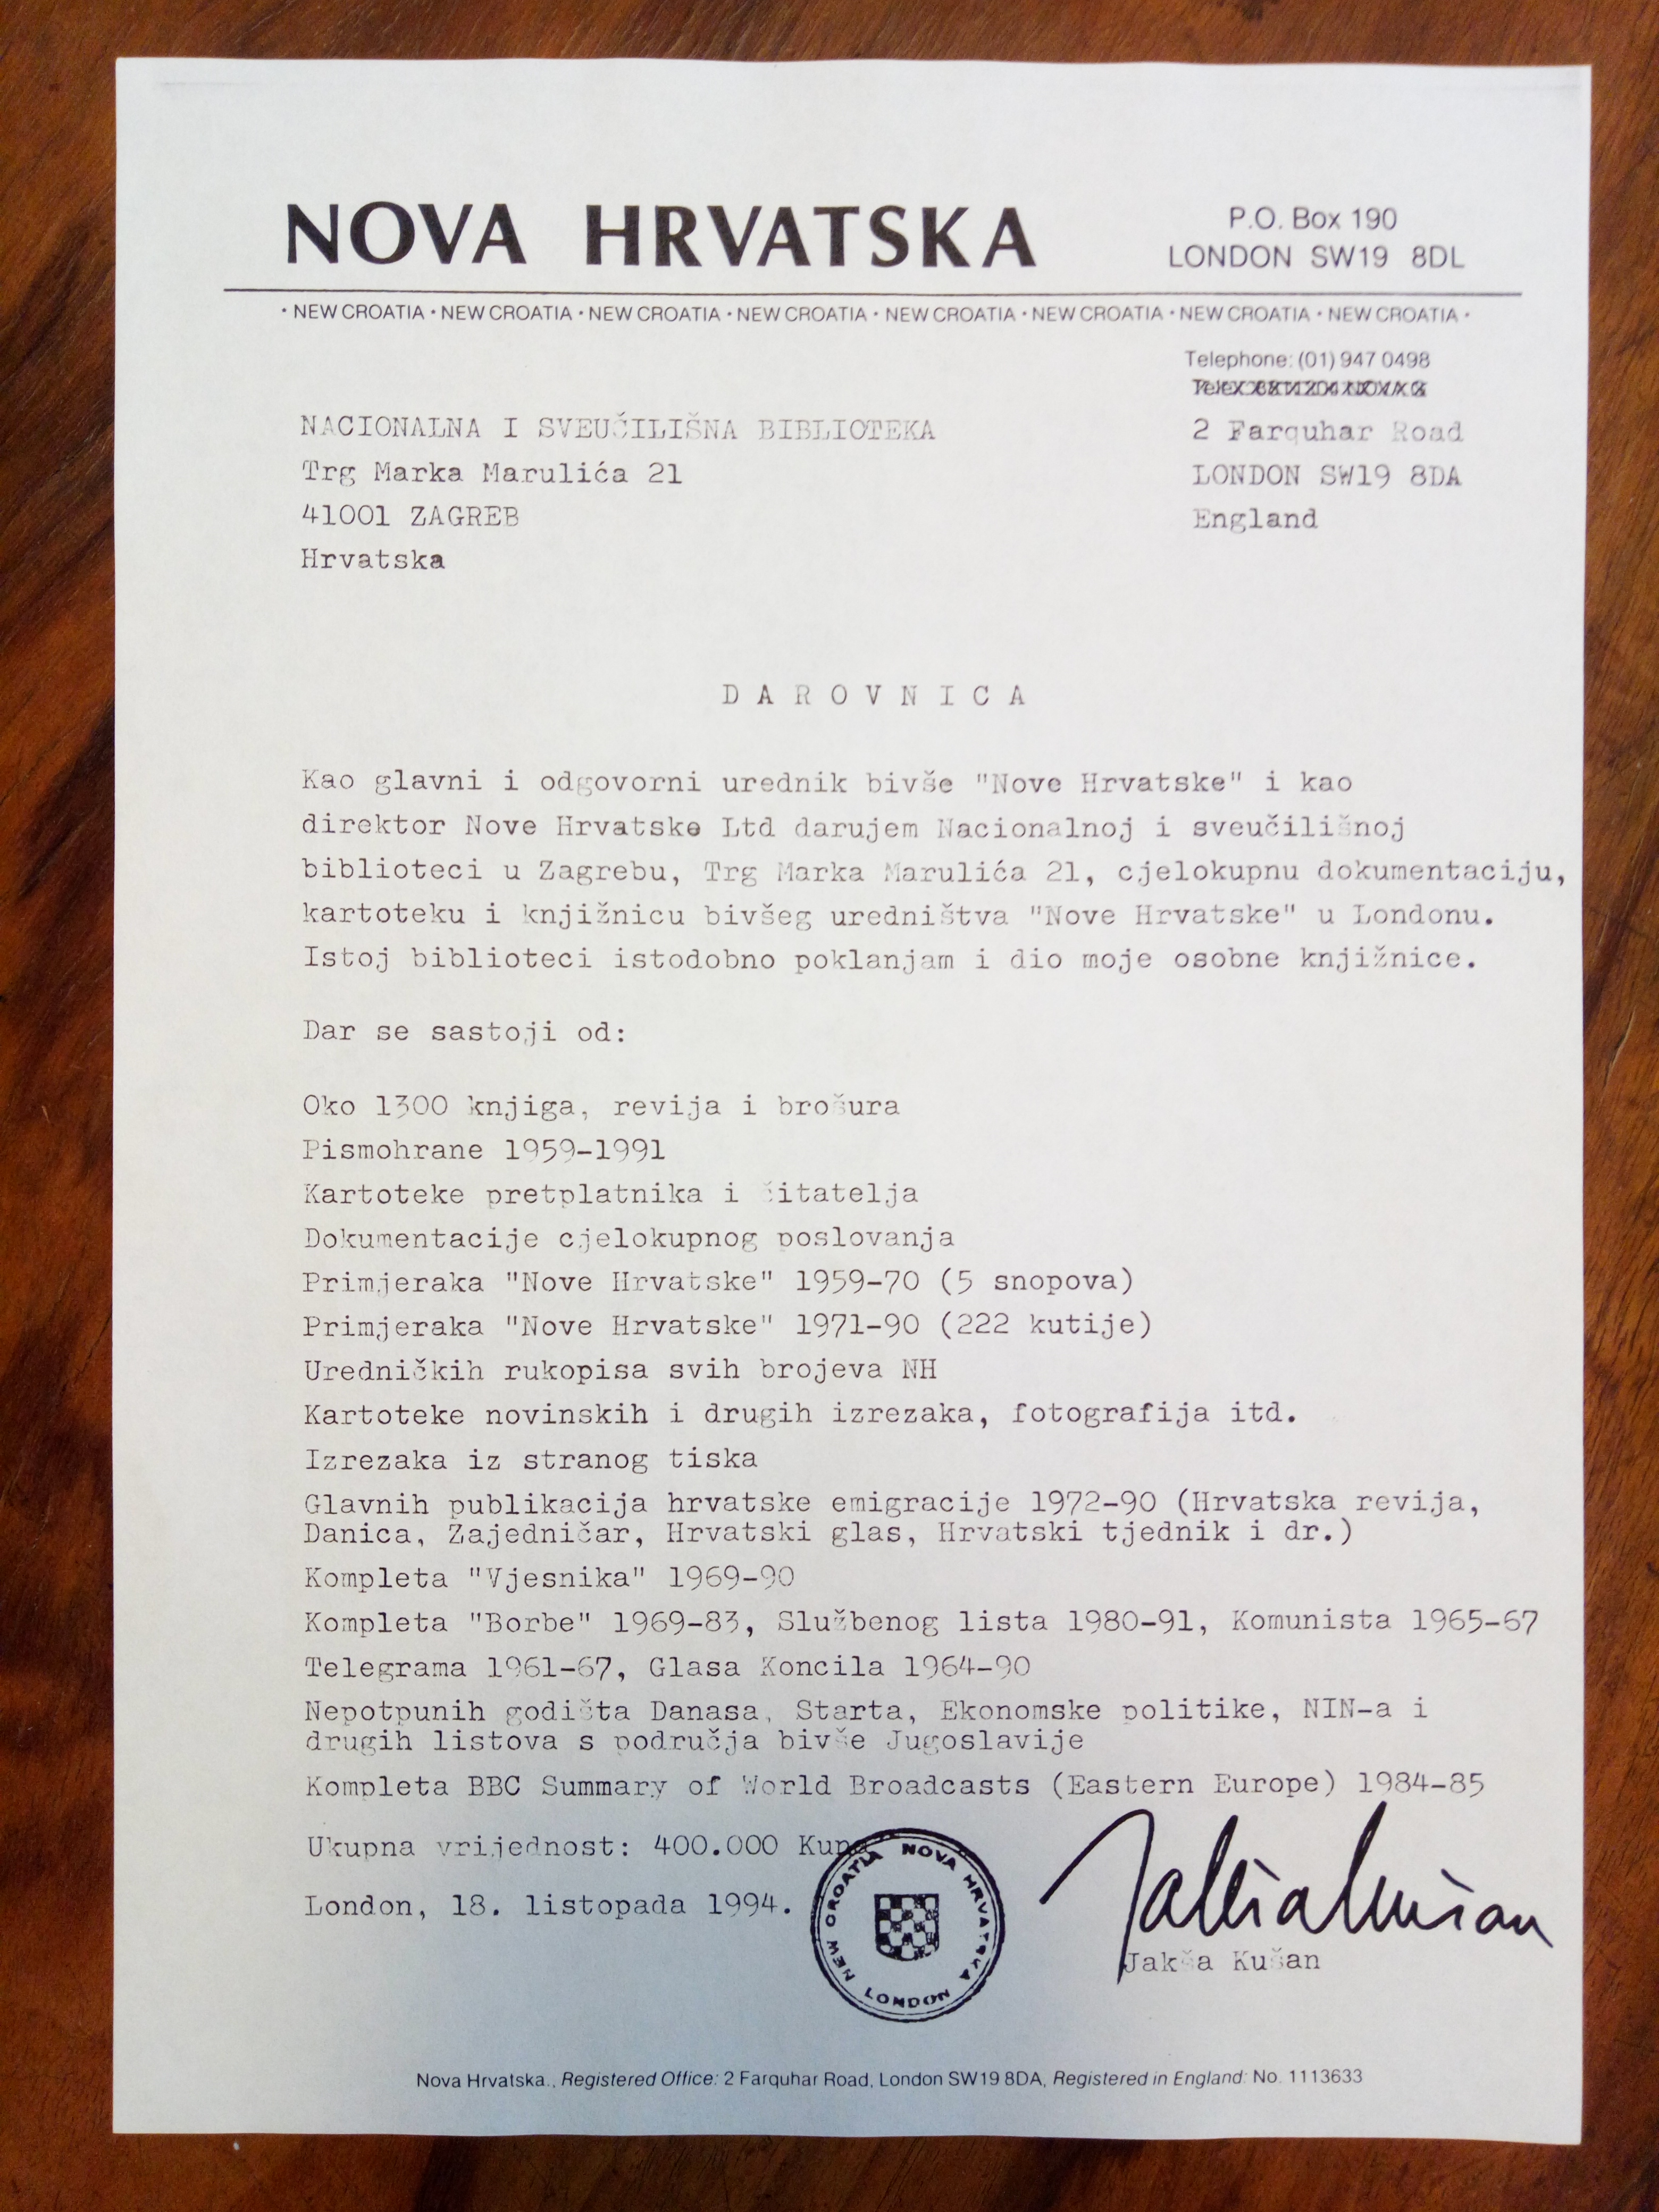 Donation agreement between Jakša Kušan and National and University Library (October 18, 1994)